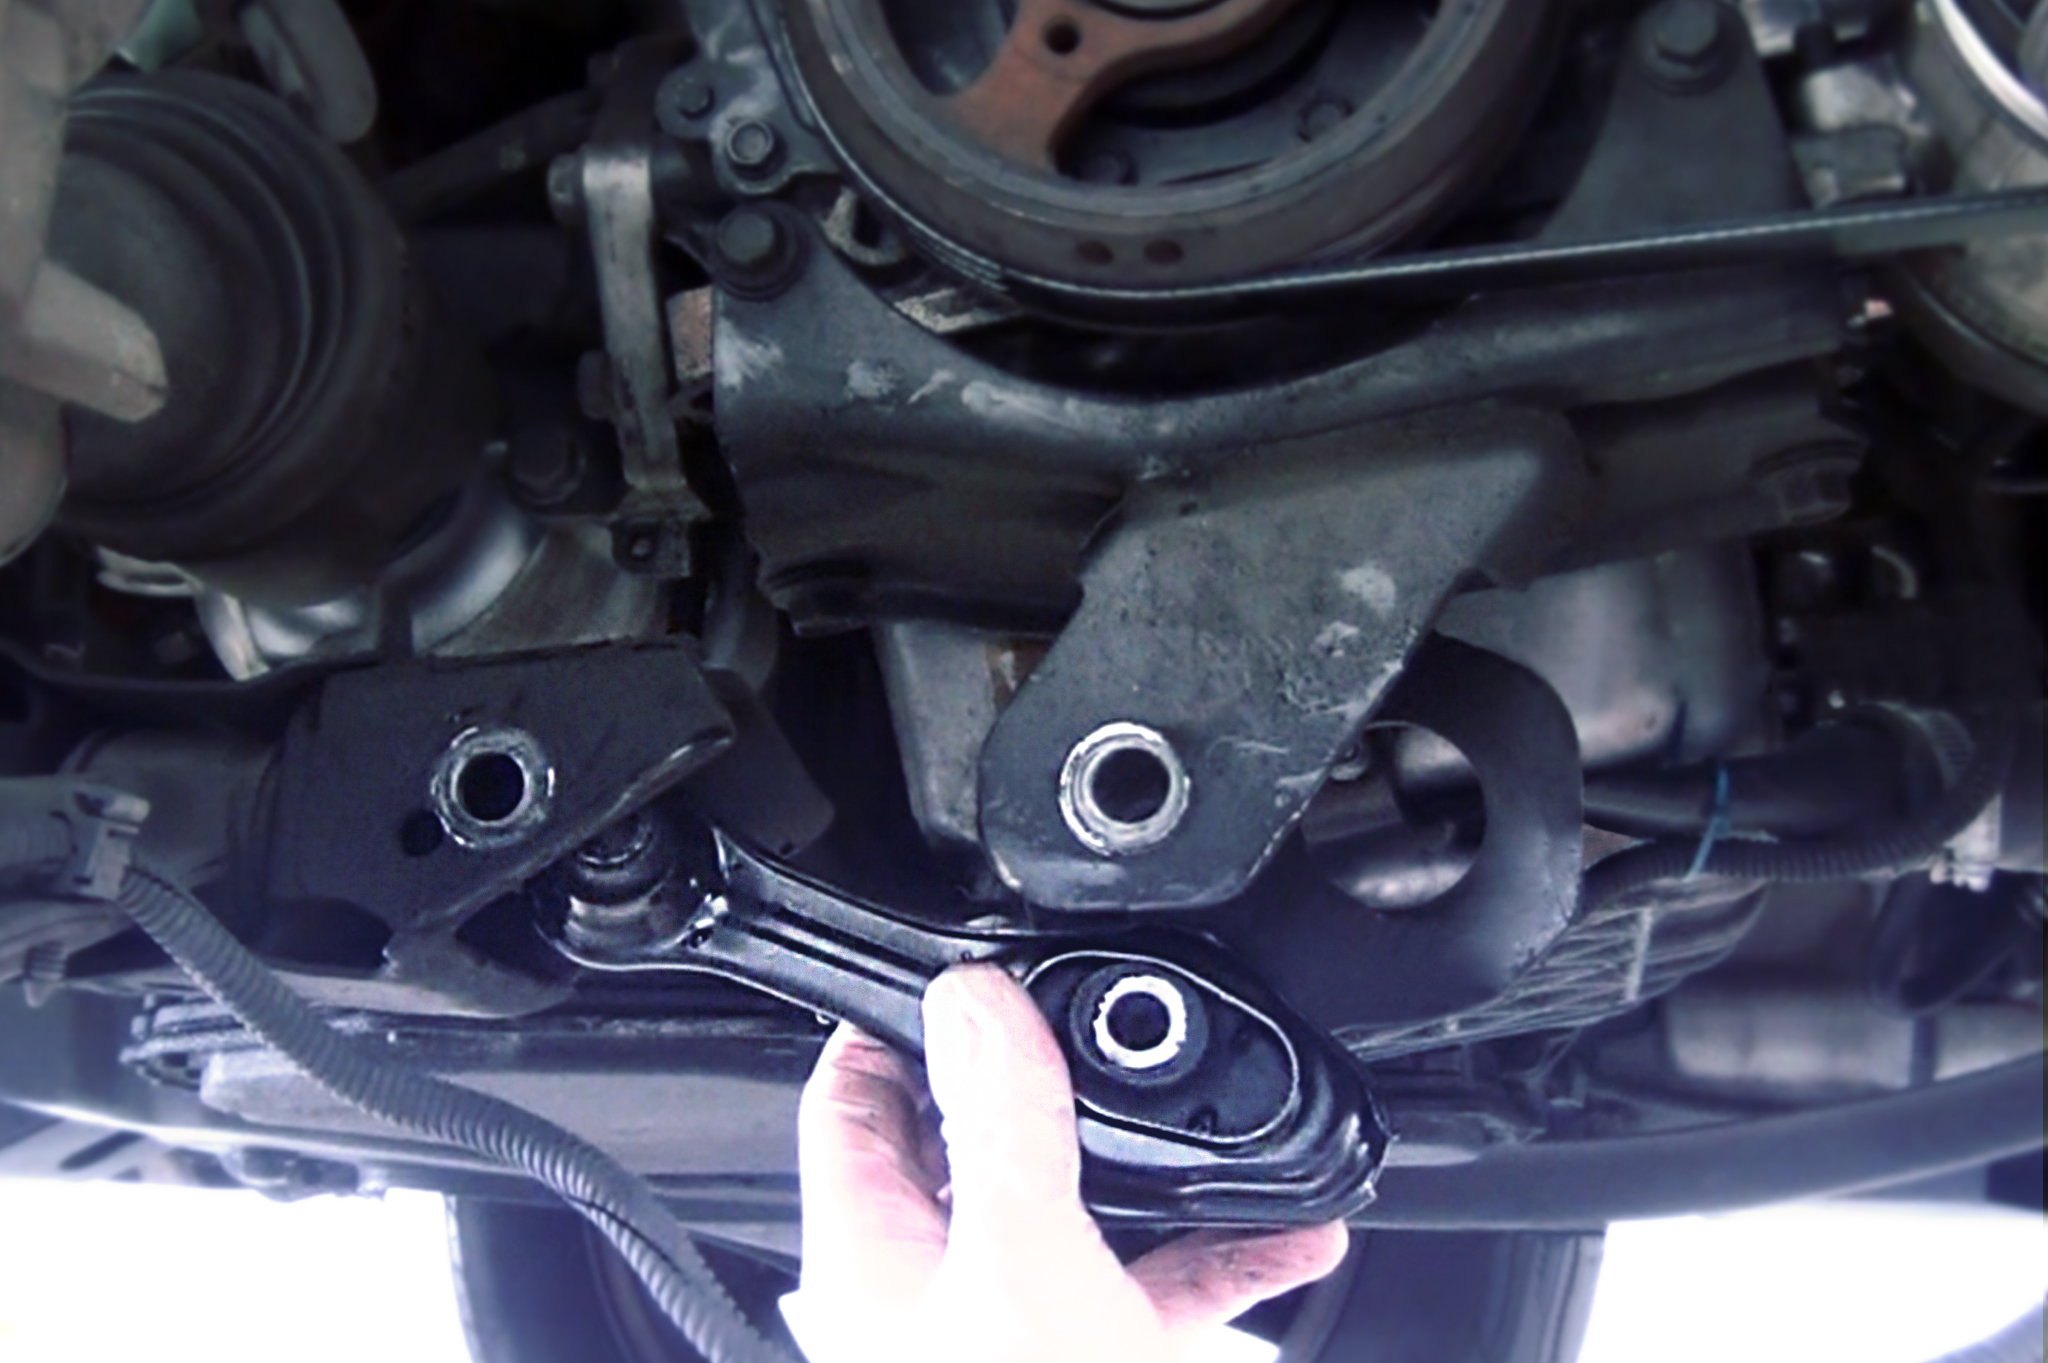 Common problems a bad engine mount will cause